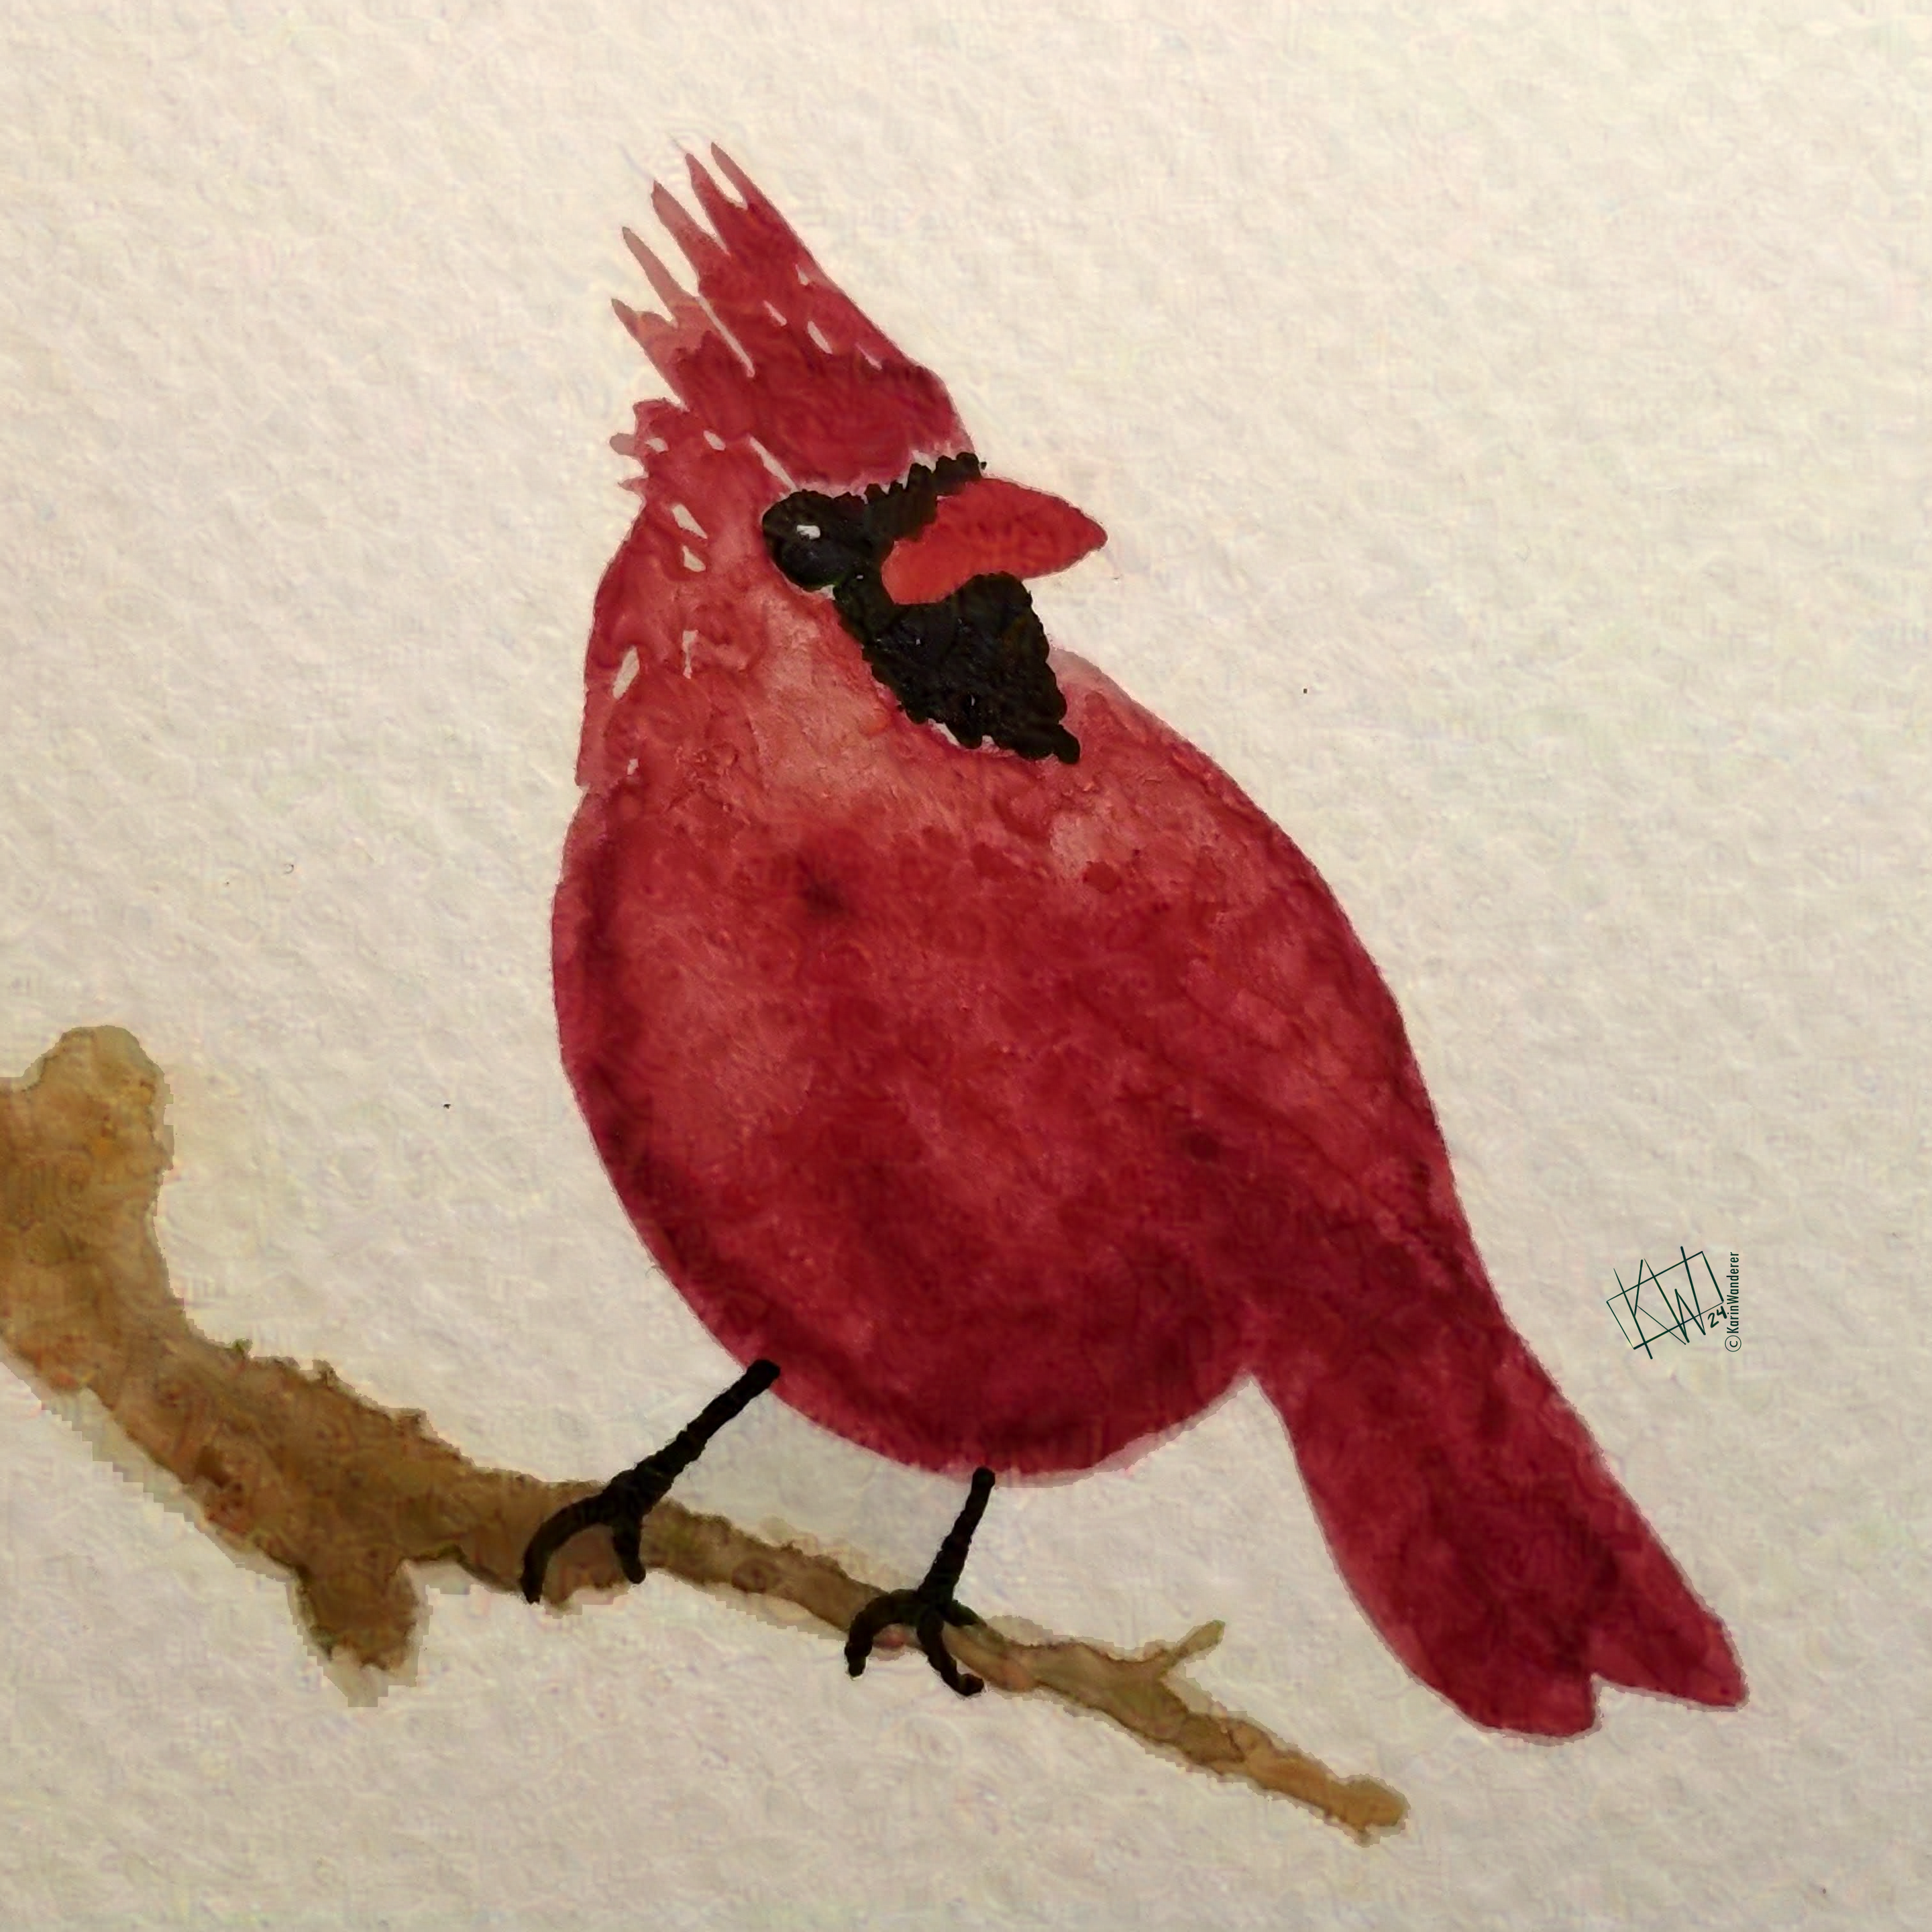 Watercolor of a plump, happy cardinal perched on a bare branch.